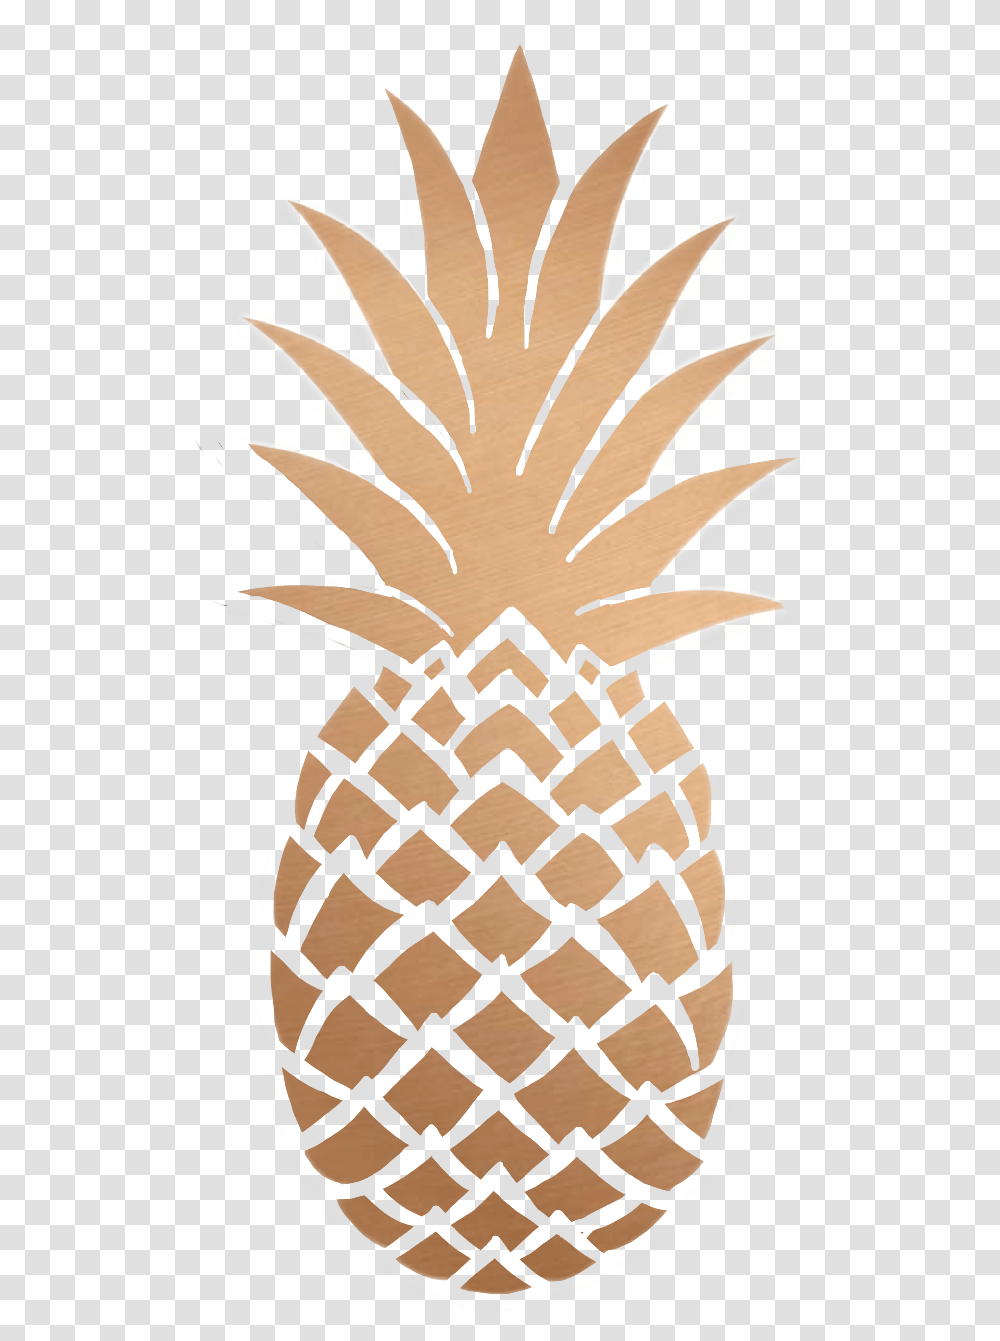 Download Sticker Pineapple Gold Interesting Art Tumblr Rose Gold Cute Phone Backgrounds, Fruit, Plant, Food, Architecture Transparent Png